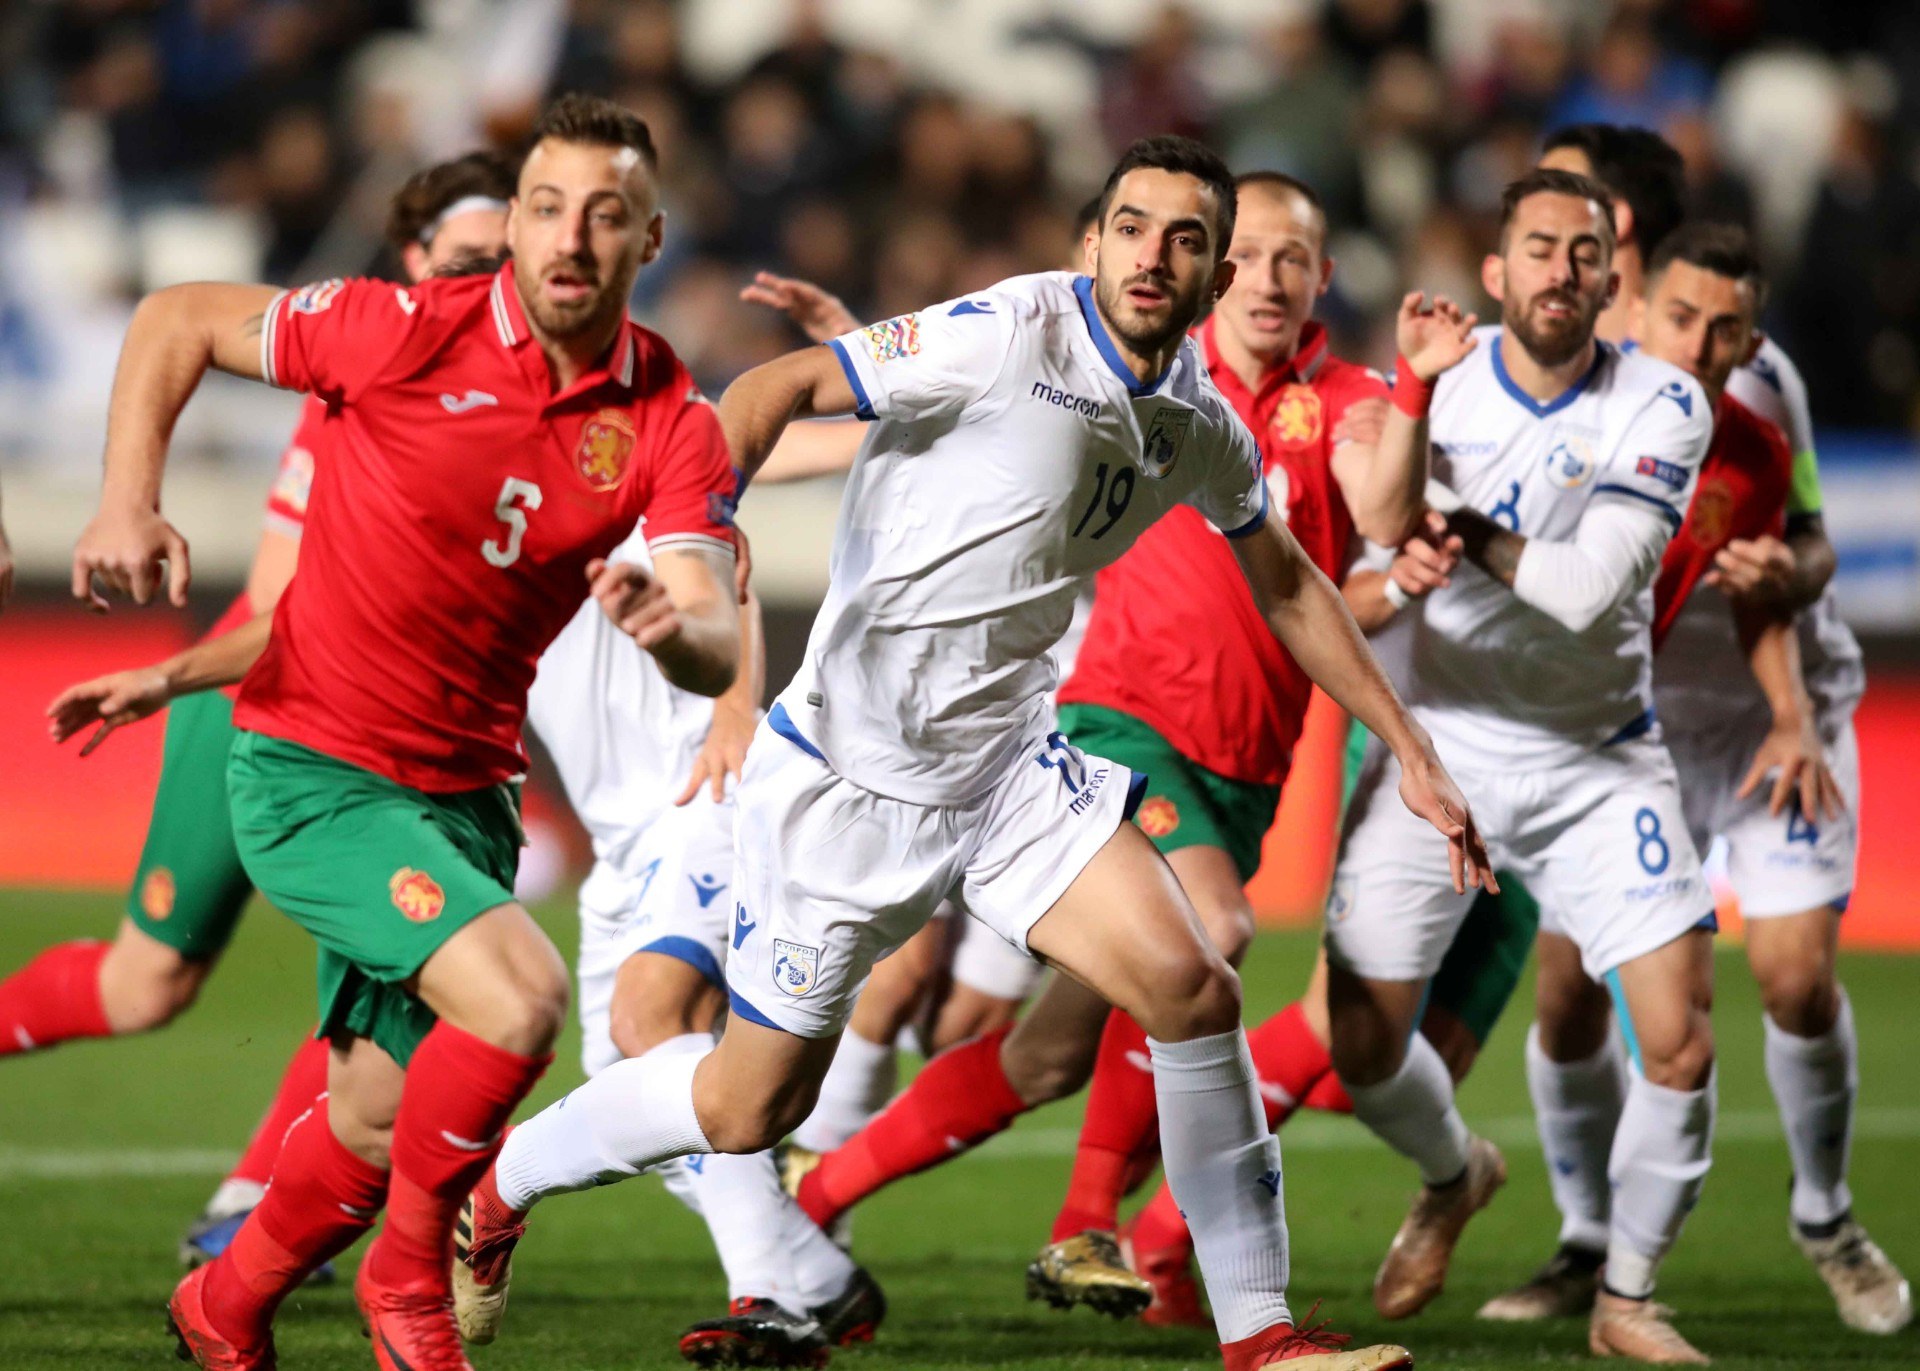 Nations League: Η Κύπρος έχασε την ευκαιρία (vid)